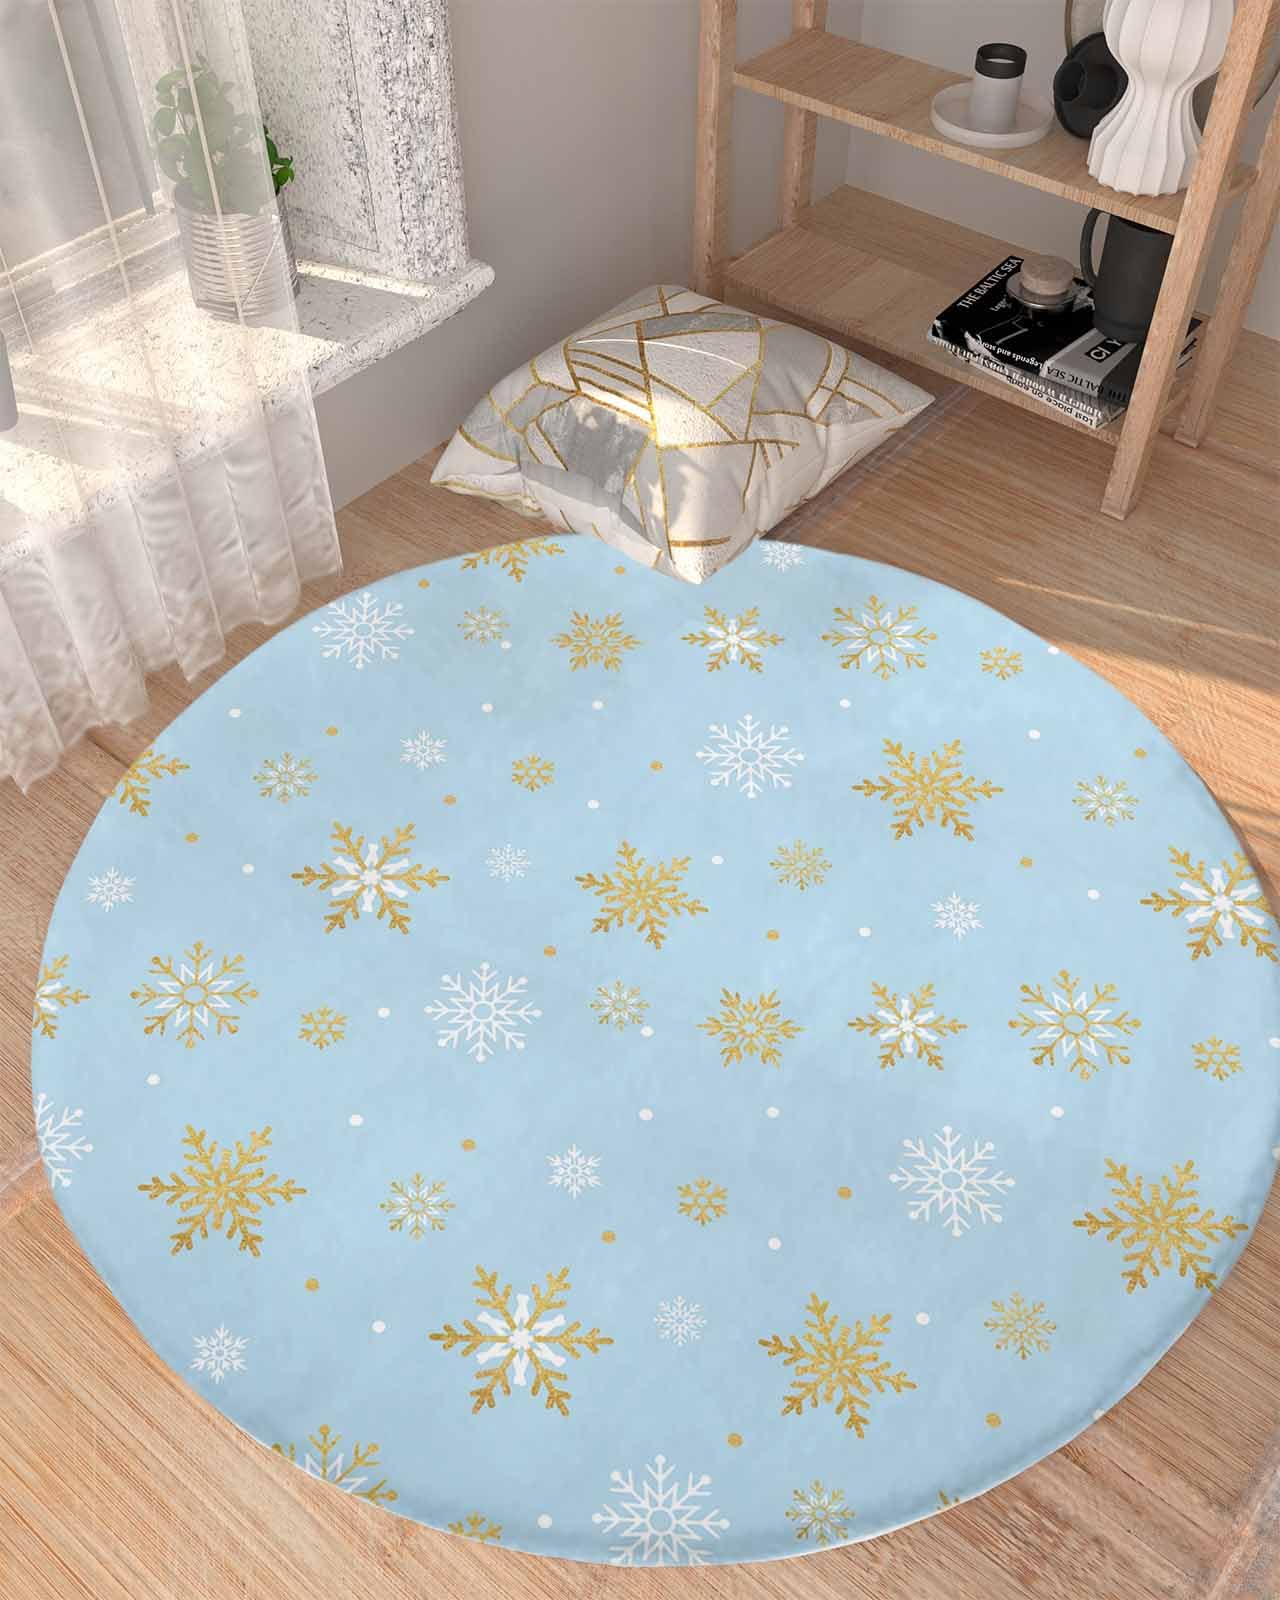 Snowflake Blue Fluffy Round Area Rug Carpets 3.3ft, Plush Shaggy Carpet Soft Circular Rugs, Non-Slip Fuzzy Accent Floor Mat for Living Room Bedroom Nursery Winter Christmas Contemporary Gold White